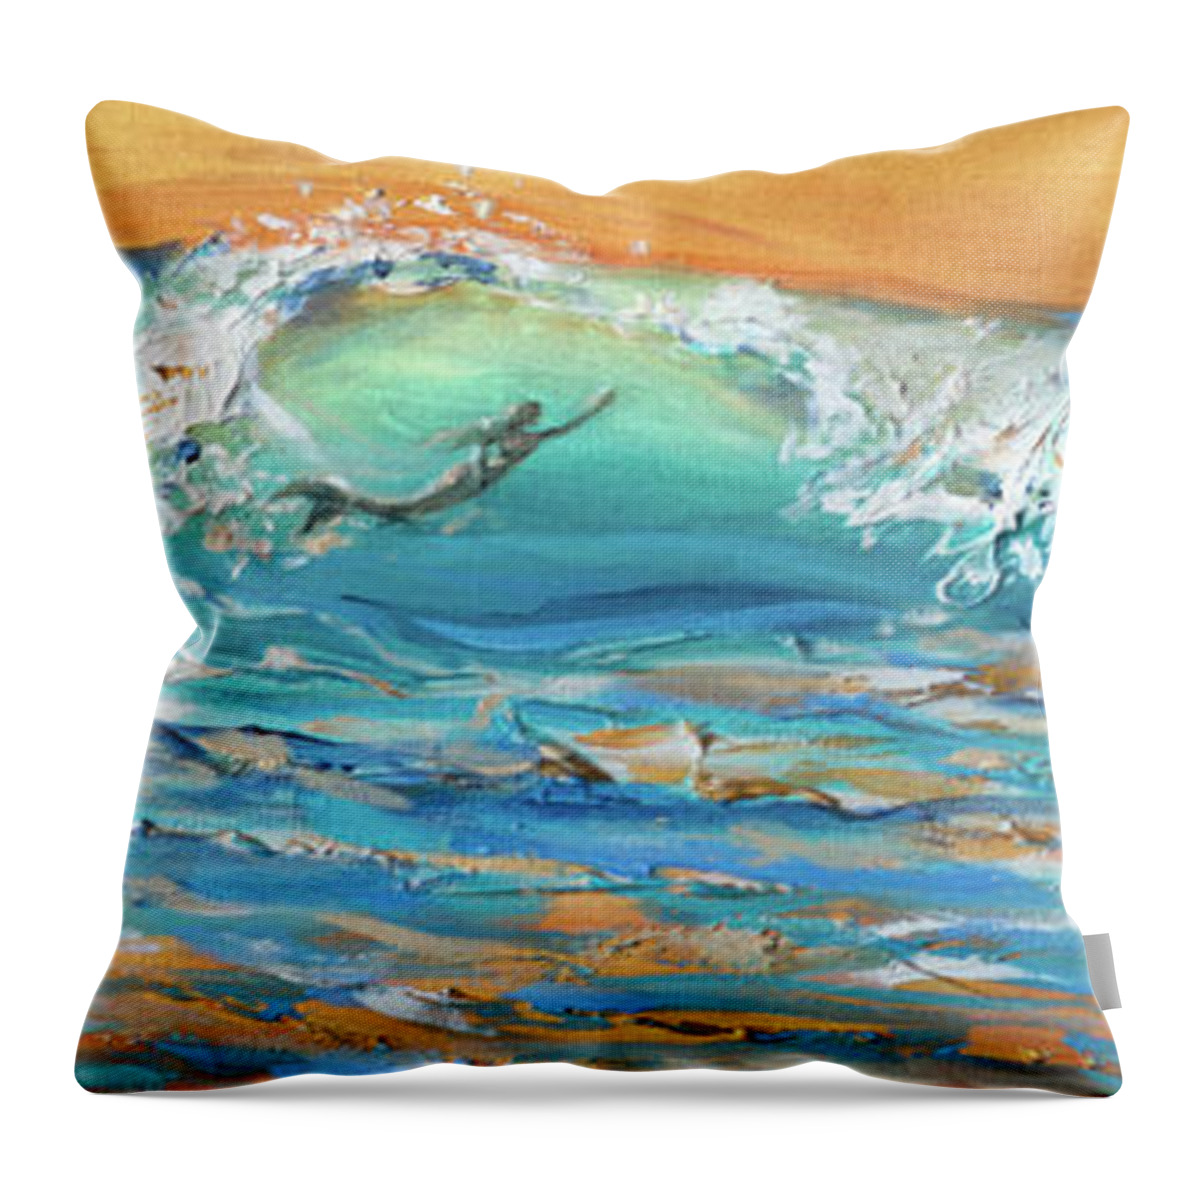 Ocean Throw Pillow featuring the painting Siren Surfing by Linda Olsen